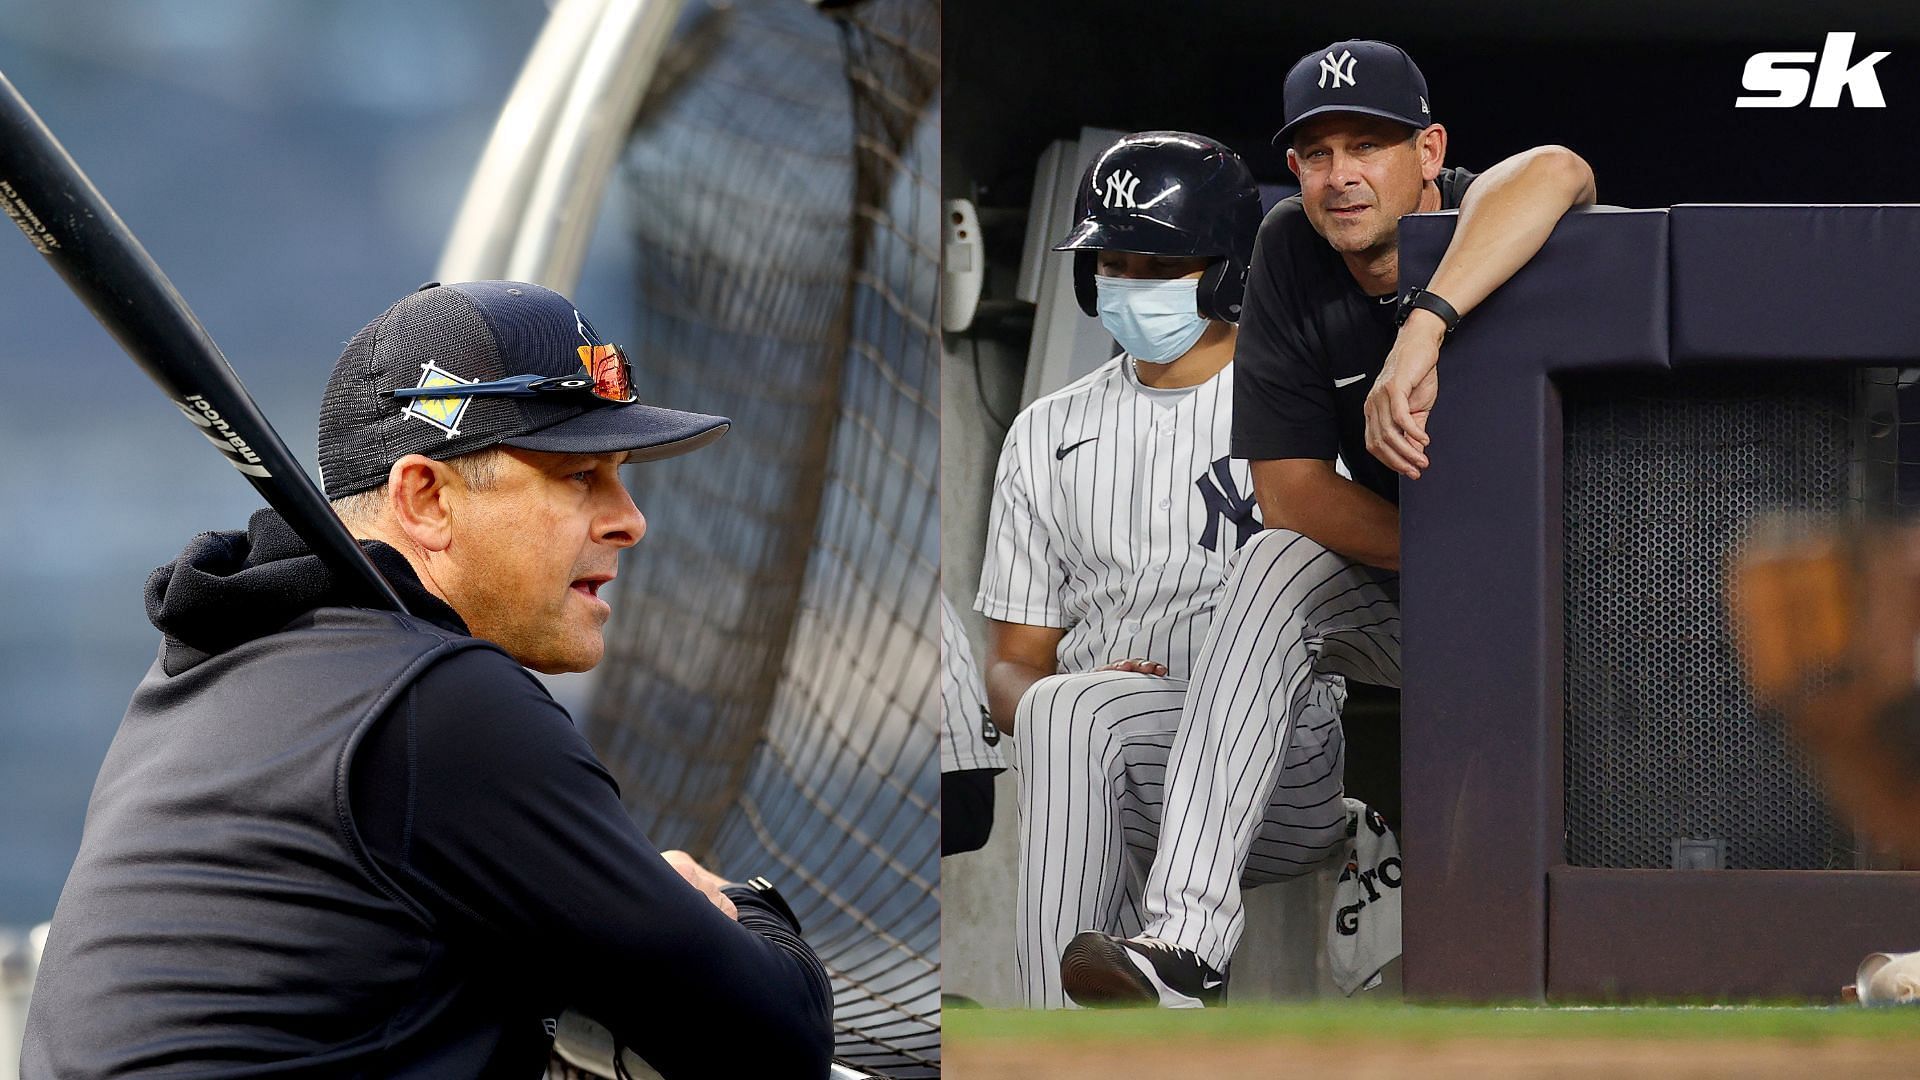 Yankees manager Aaron Boone earned his 500th career win on Tuesday